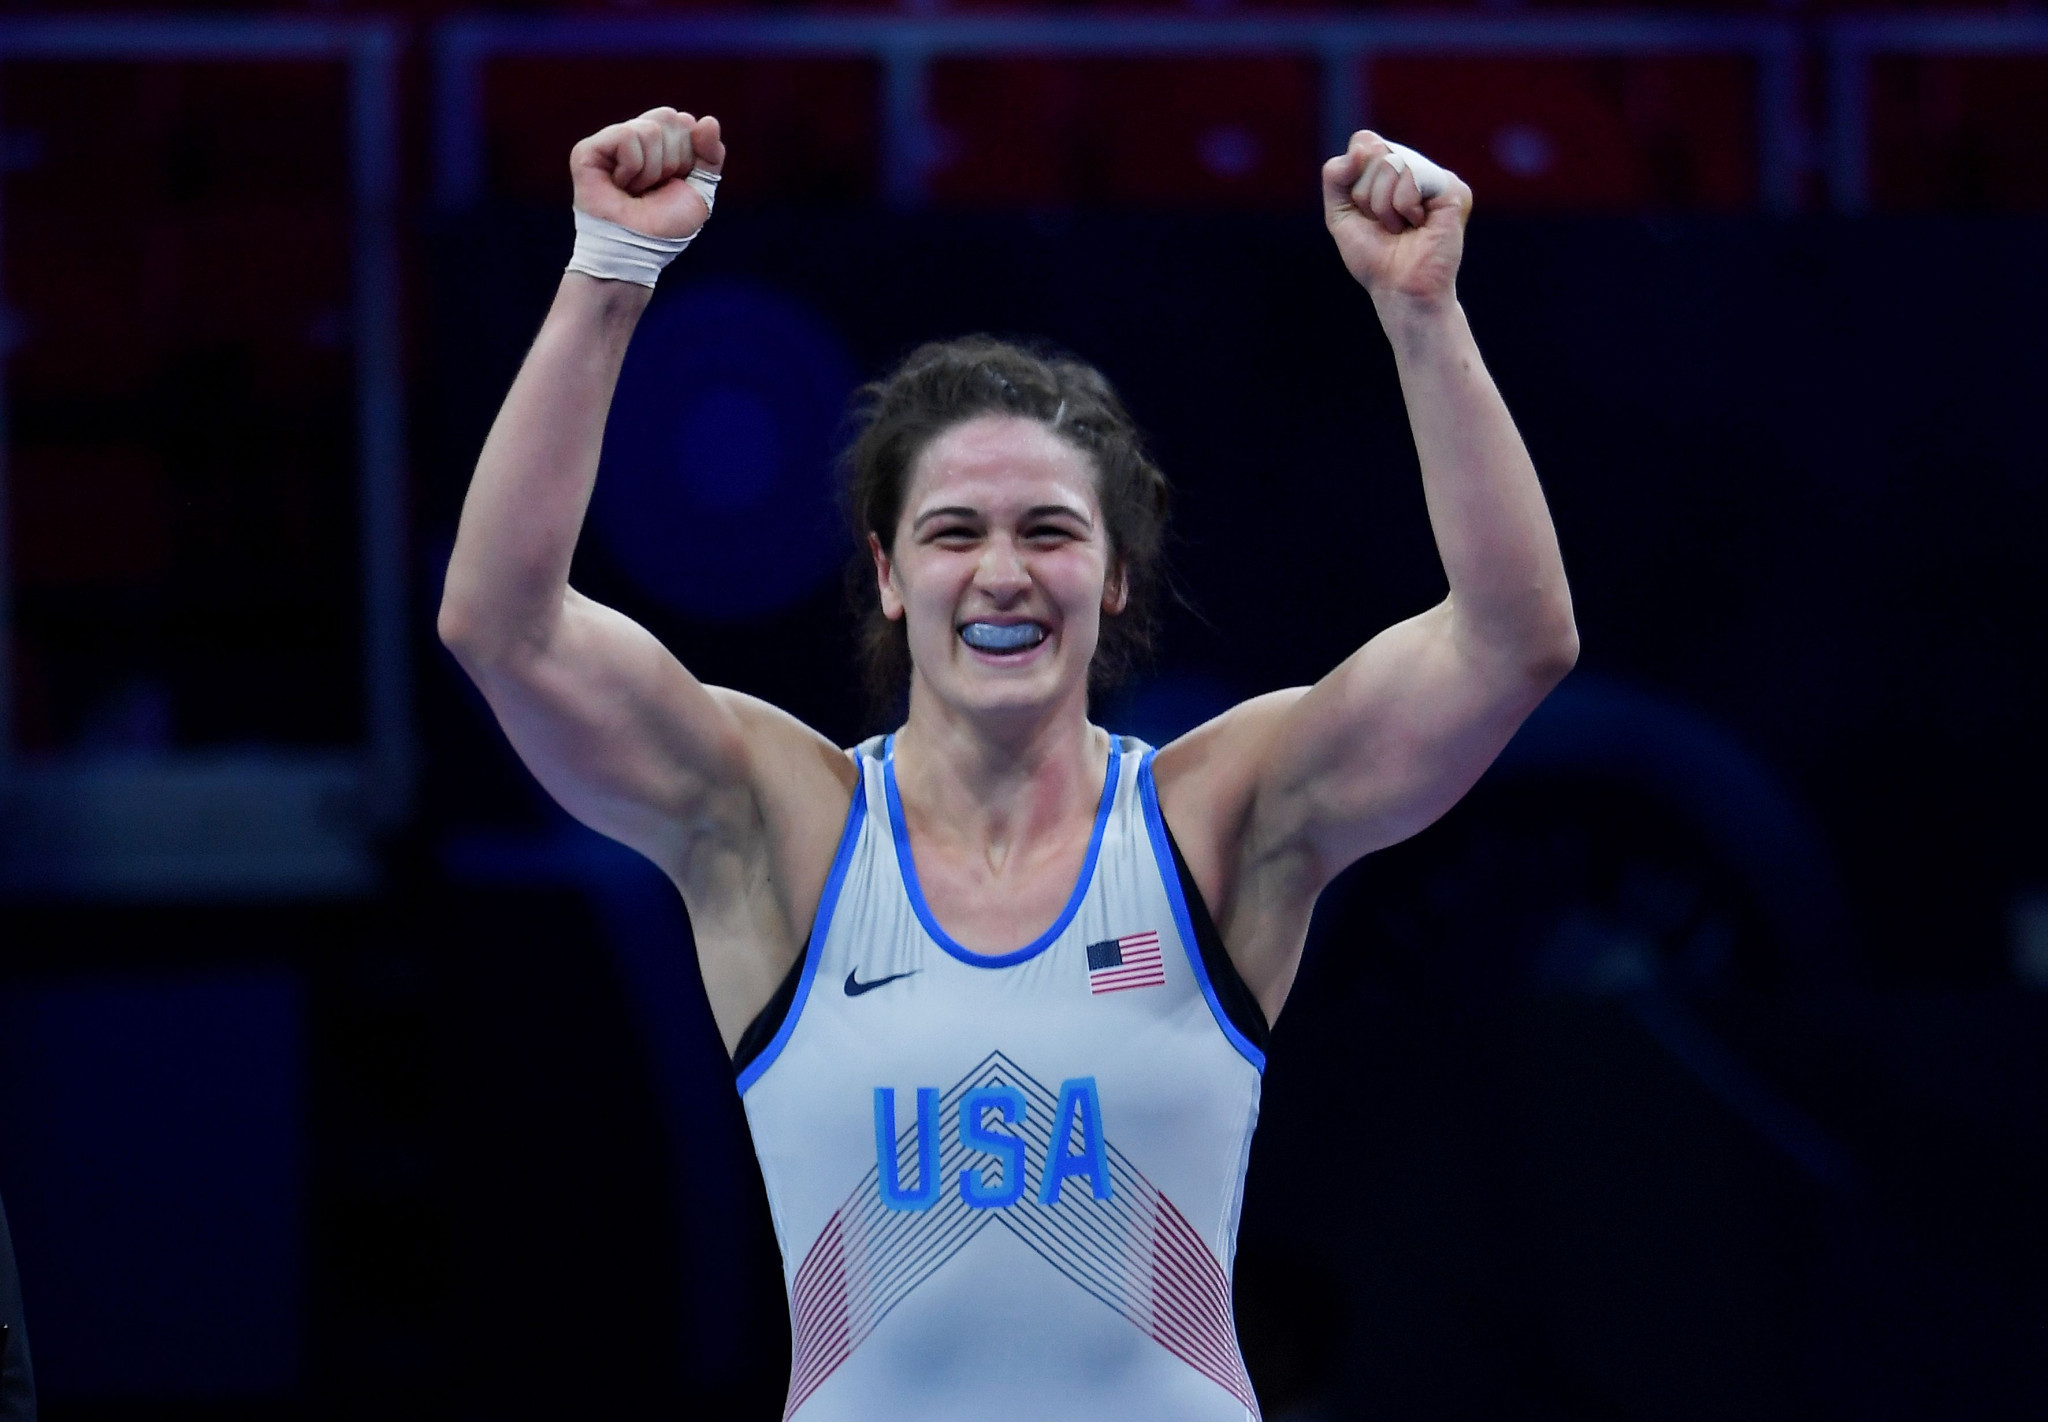 Gray among winners as women's competition concludes at Pan American Wrestling Championships